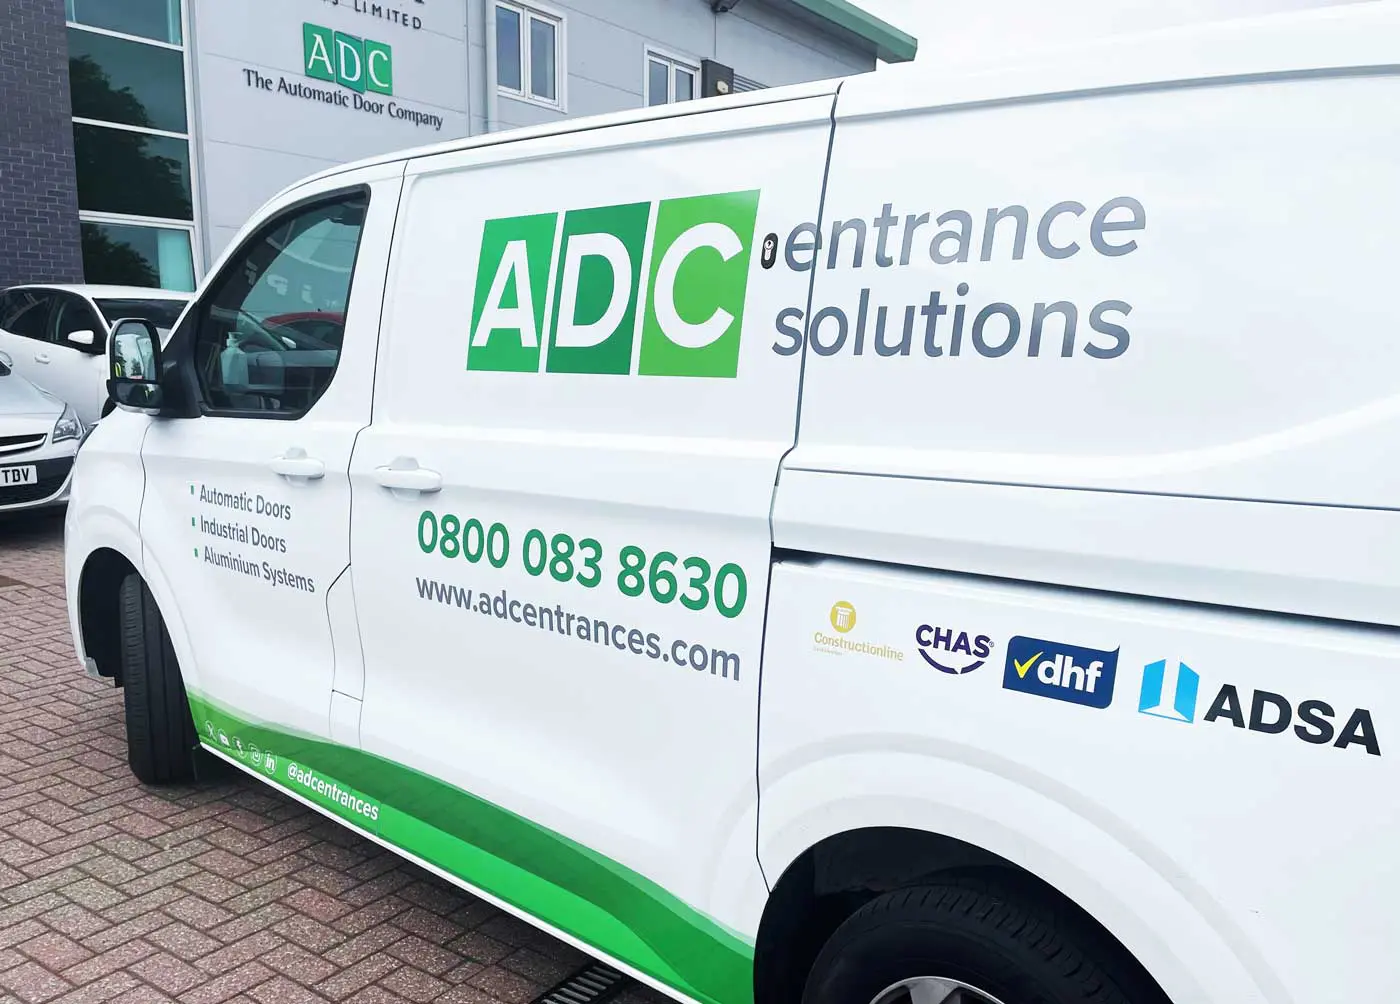 ADC engineers are located throughout the North of England